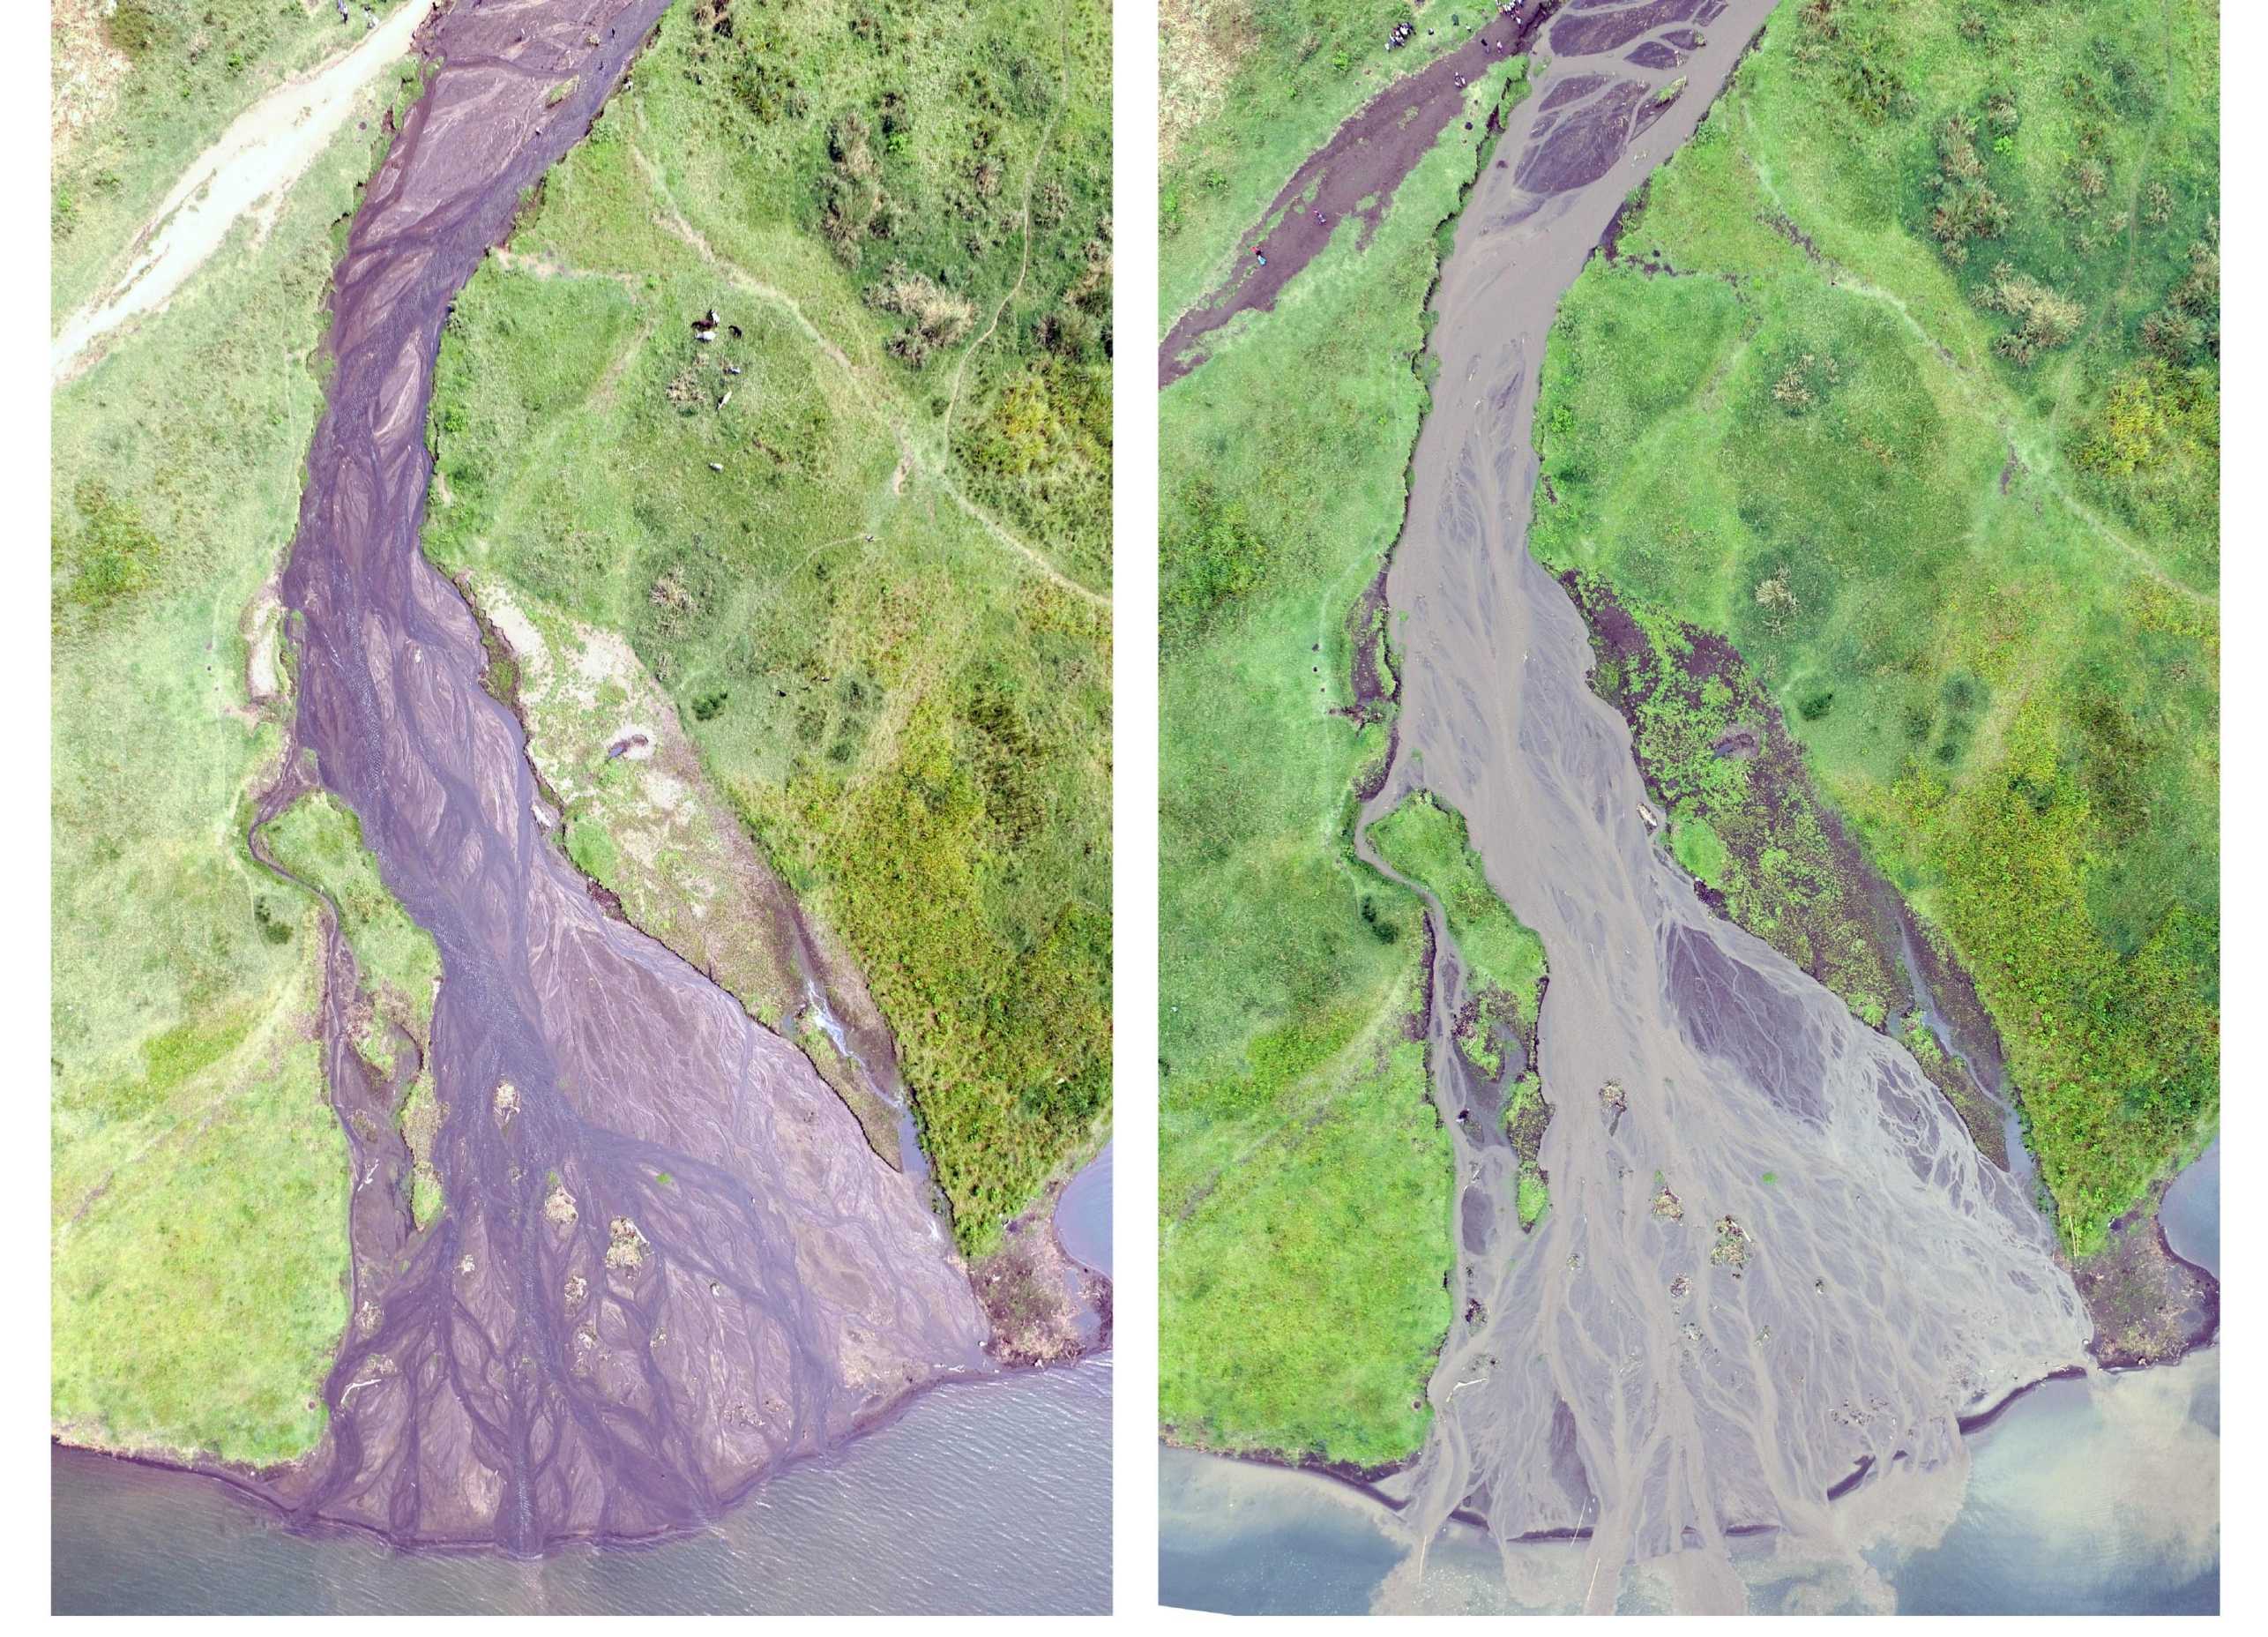 Large sediment flows into Lake Kivu after a strong rain event